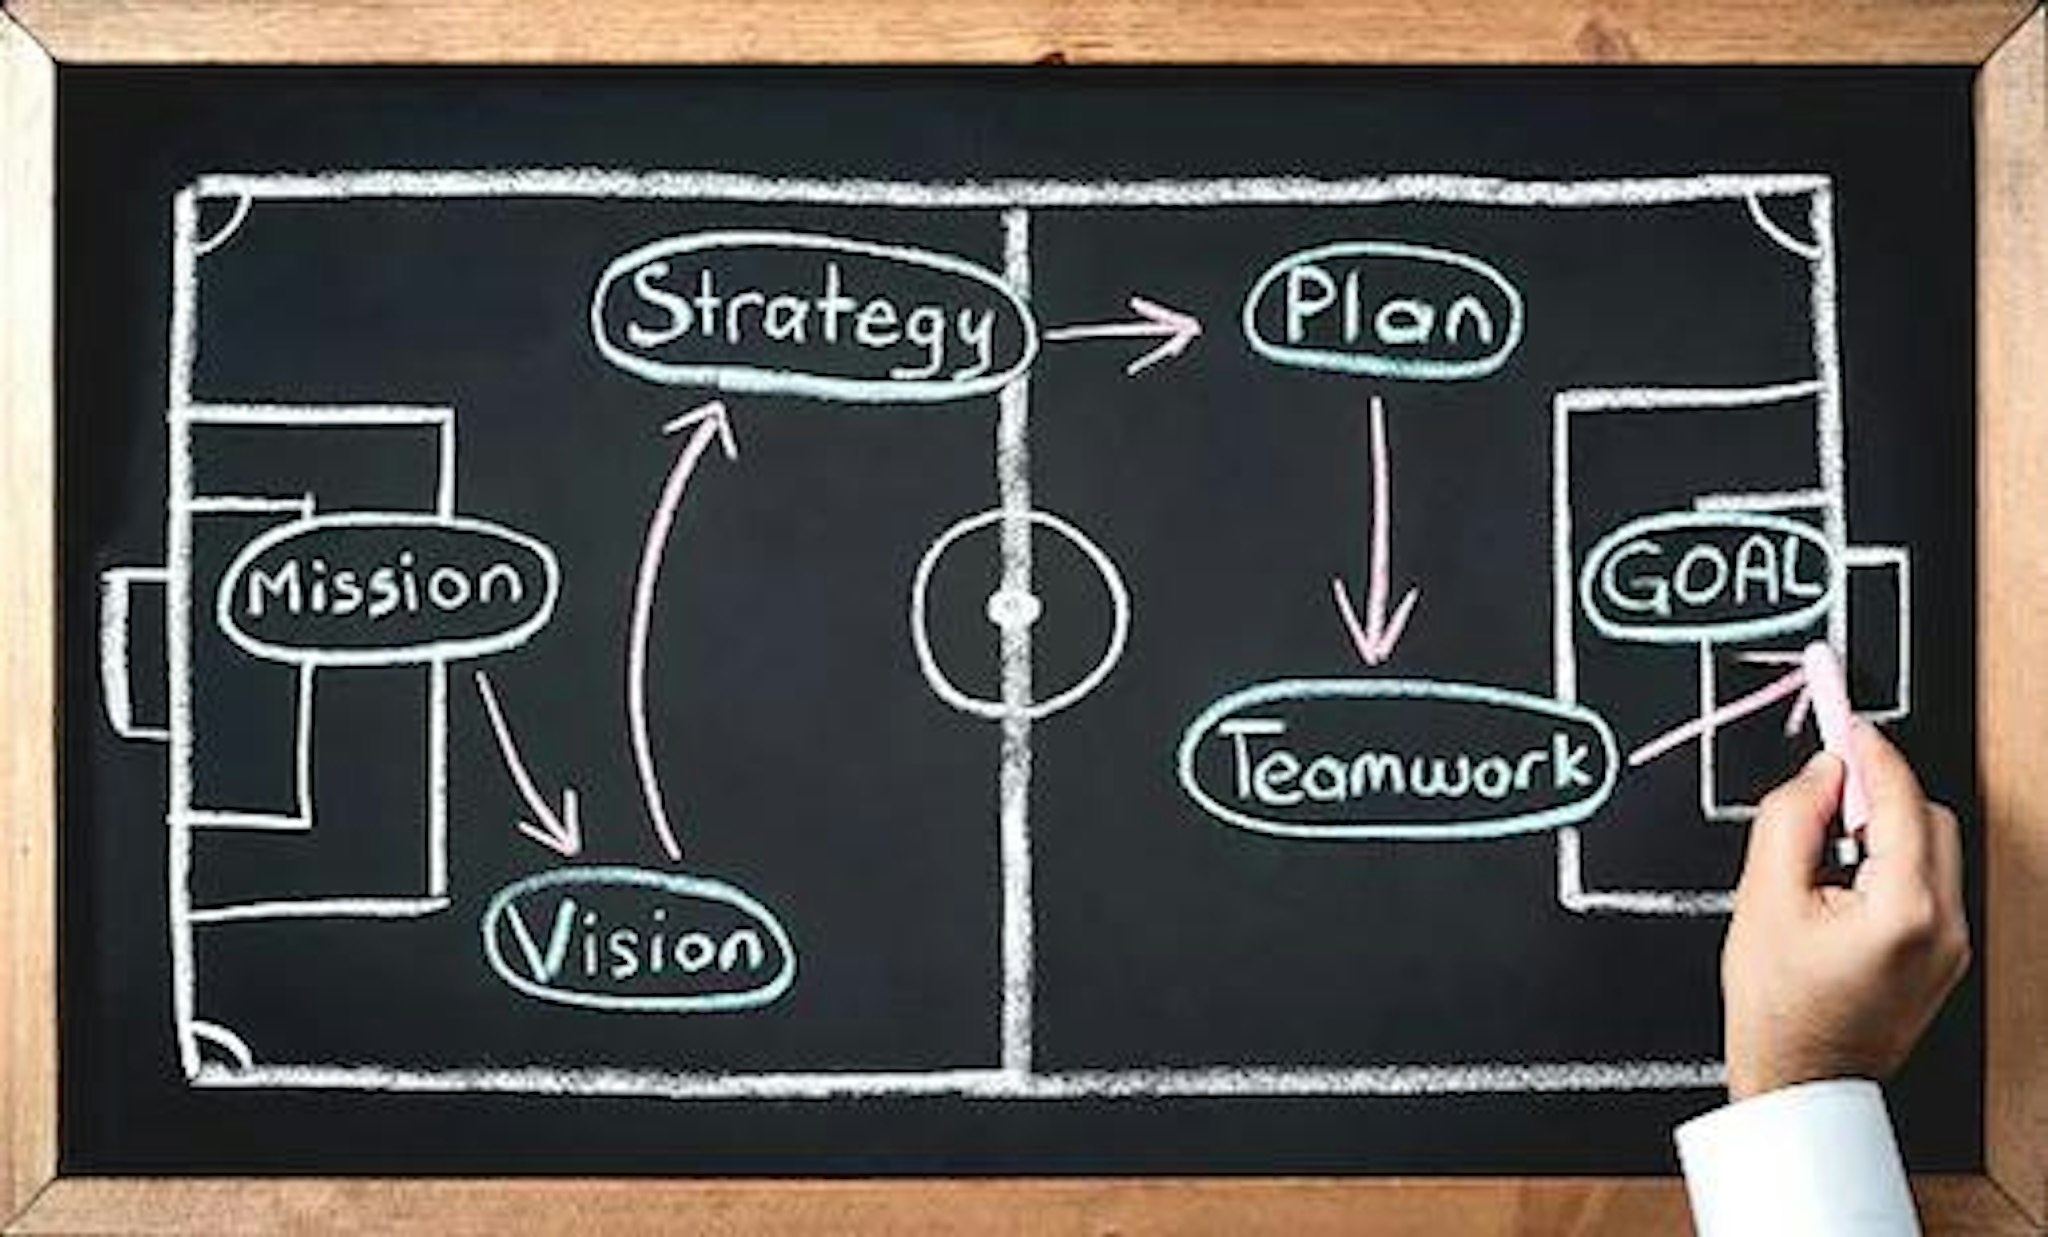 A gameplan illustrating the role of the nom/gov committee.